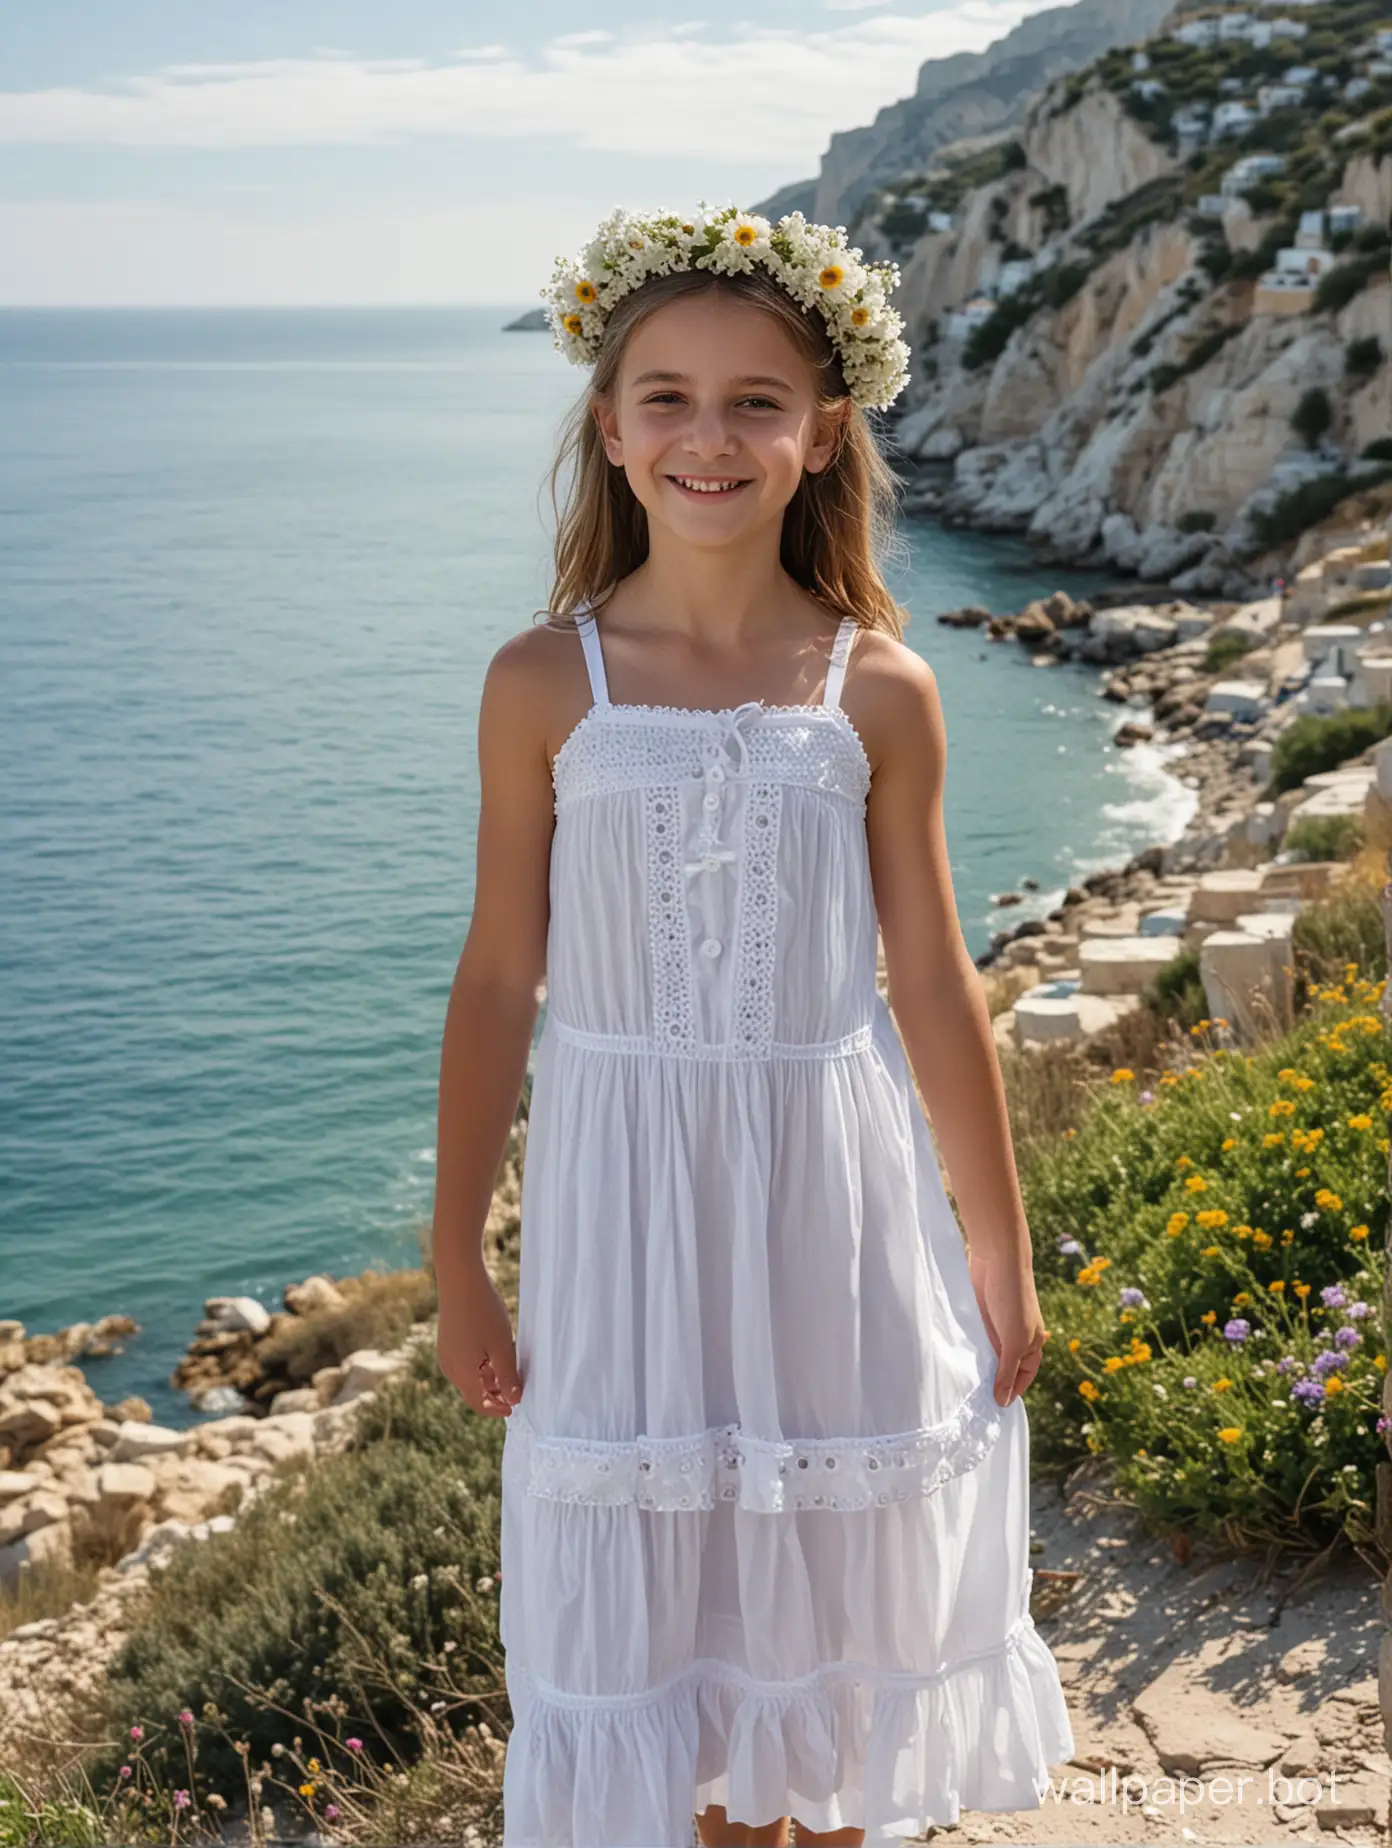 11-year-old girl, dress, flower wreath on her head, full height, smile, Crimea, view of the sea